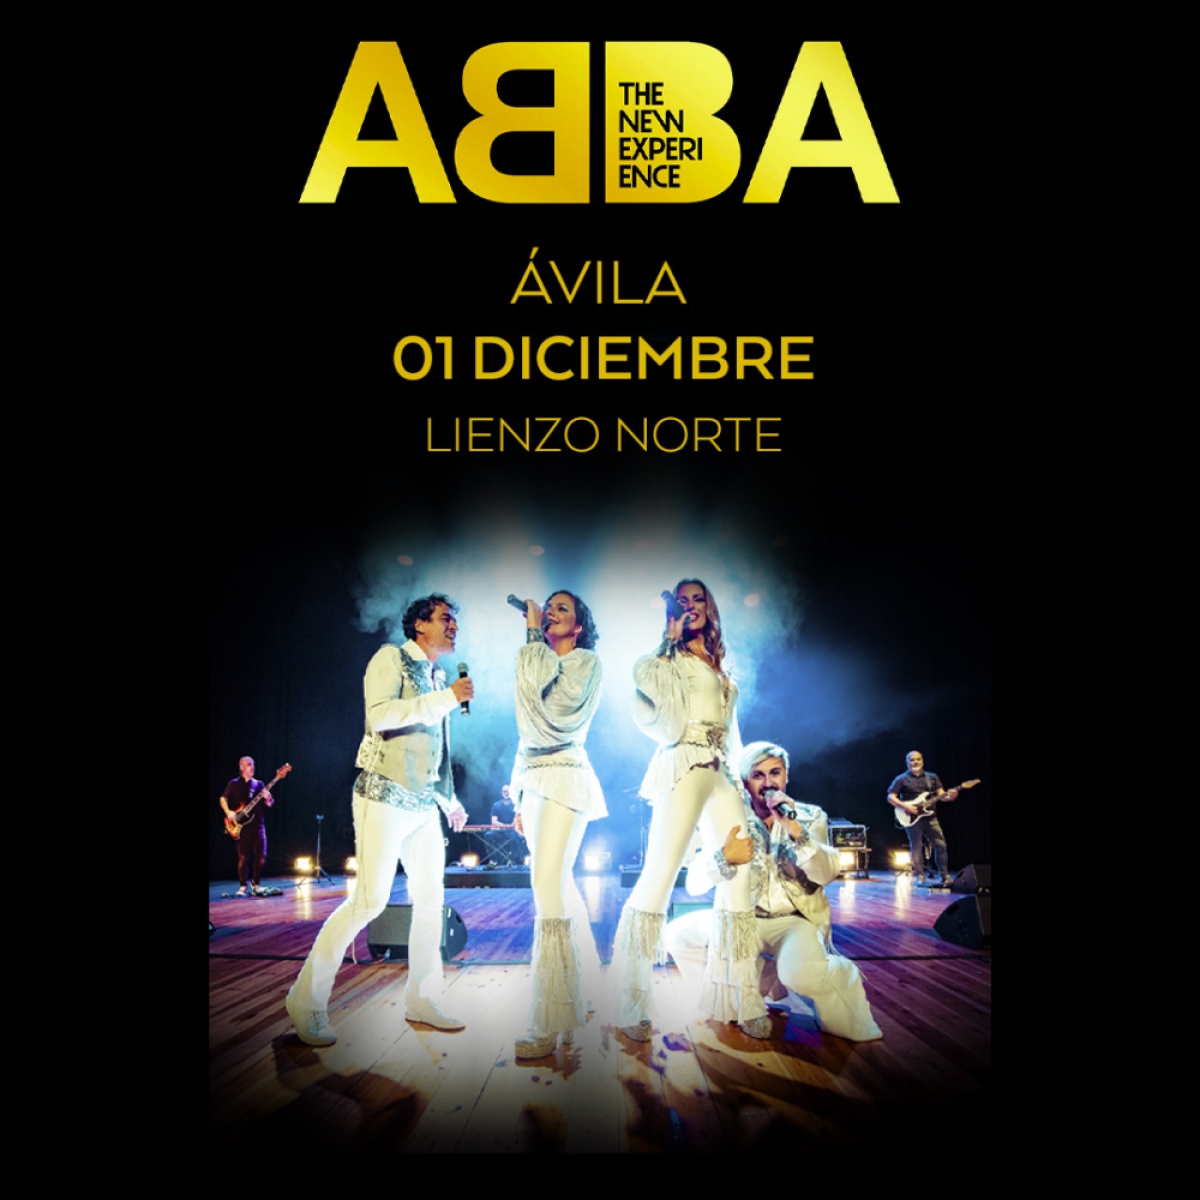 ABBA - The New Experience